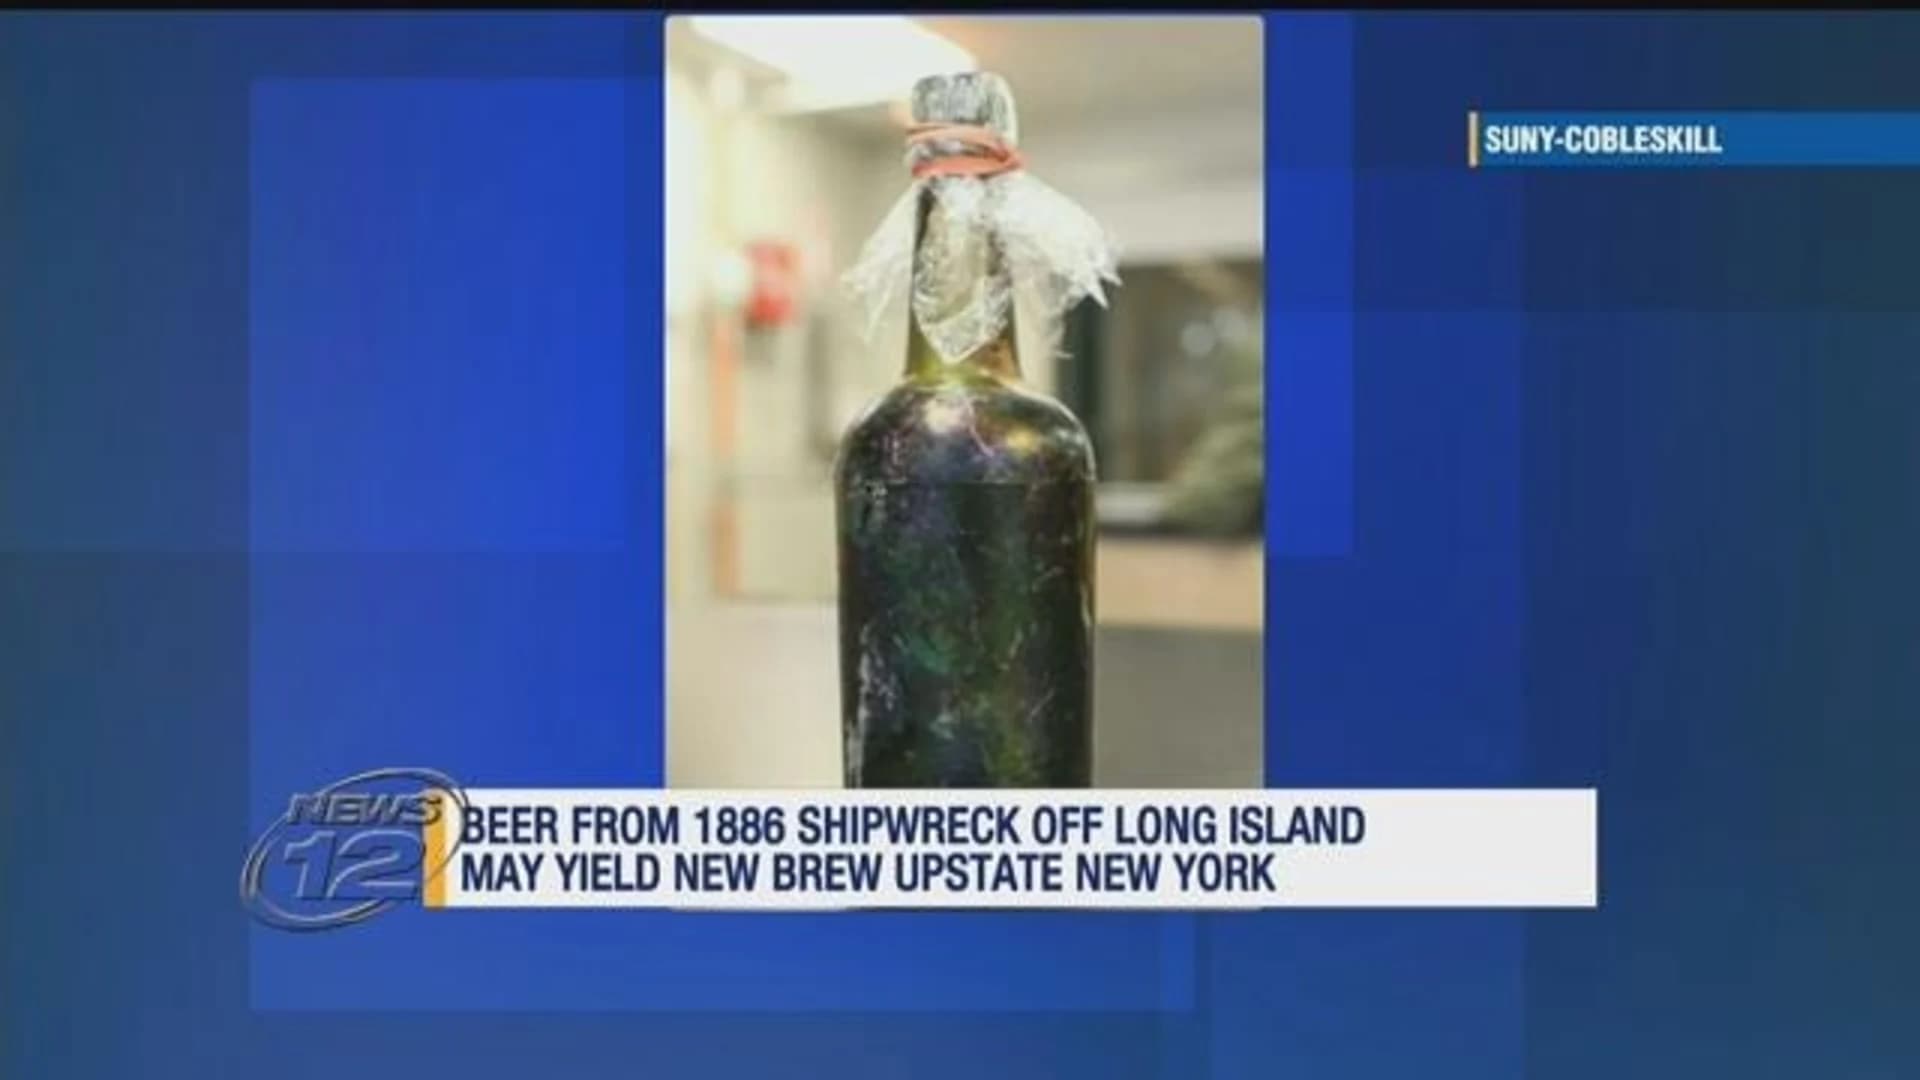 Beer bottle from shipwreck off LI may be used for new beer